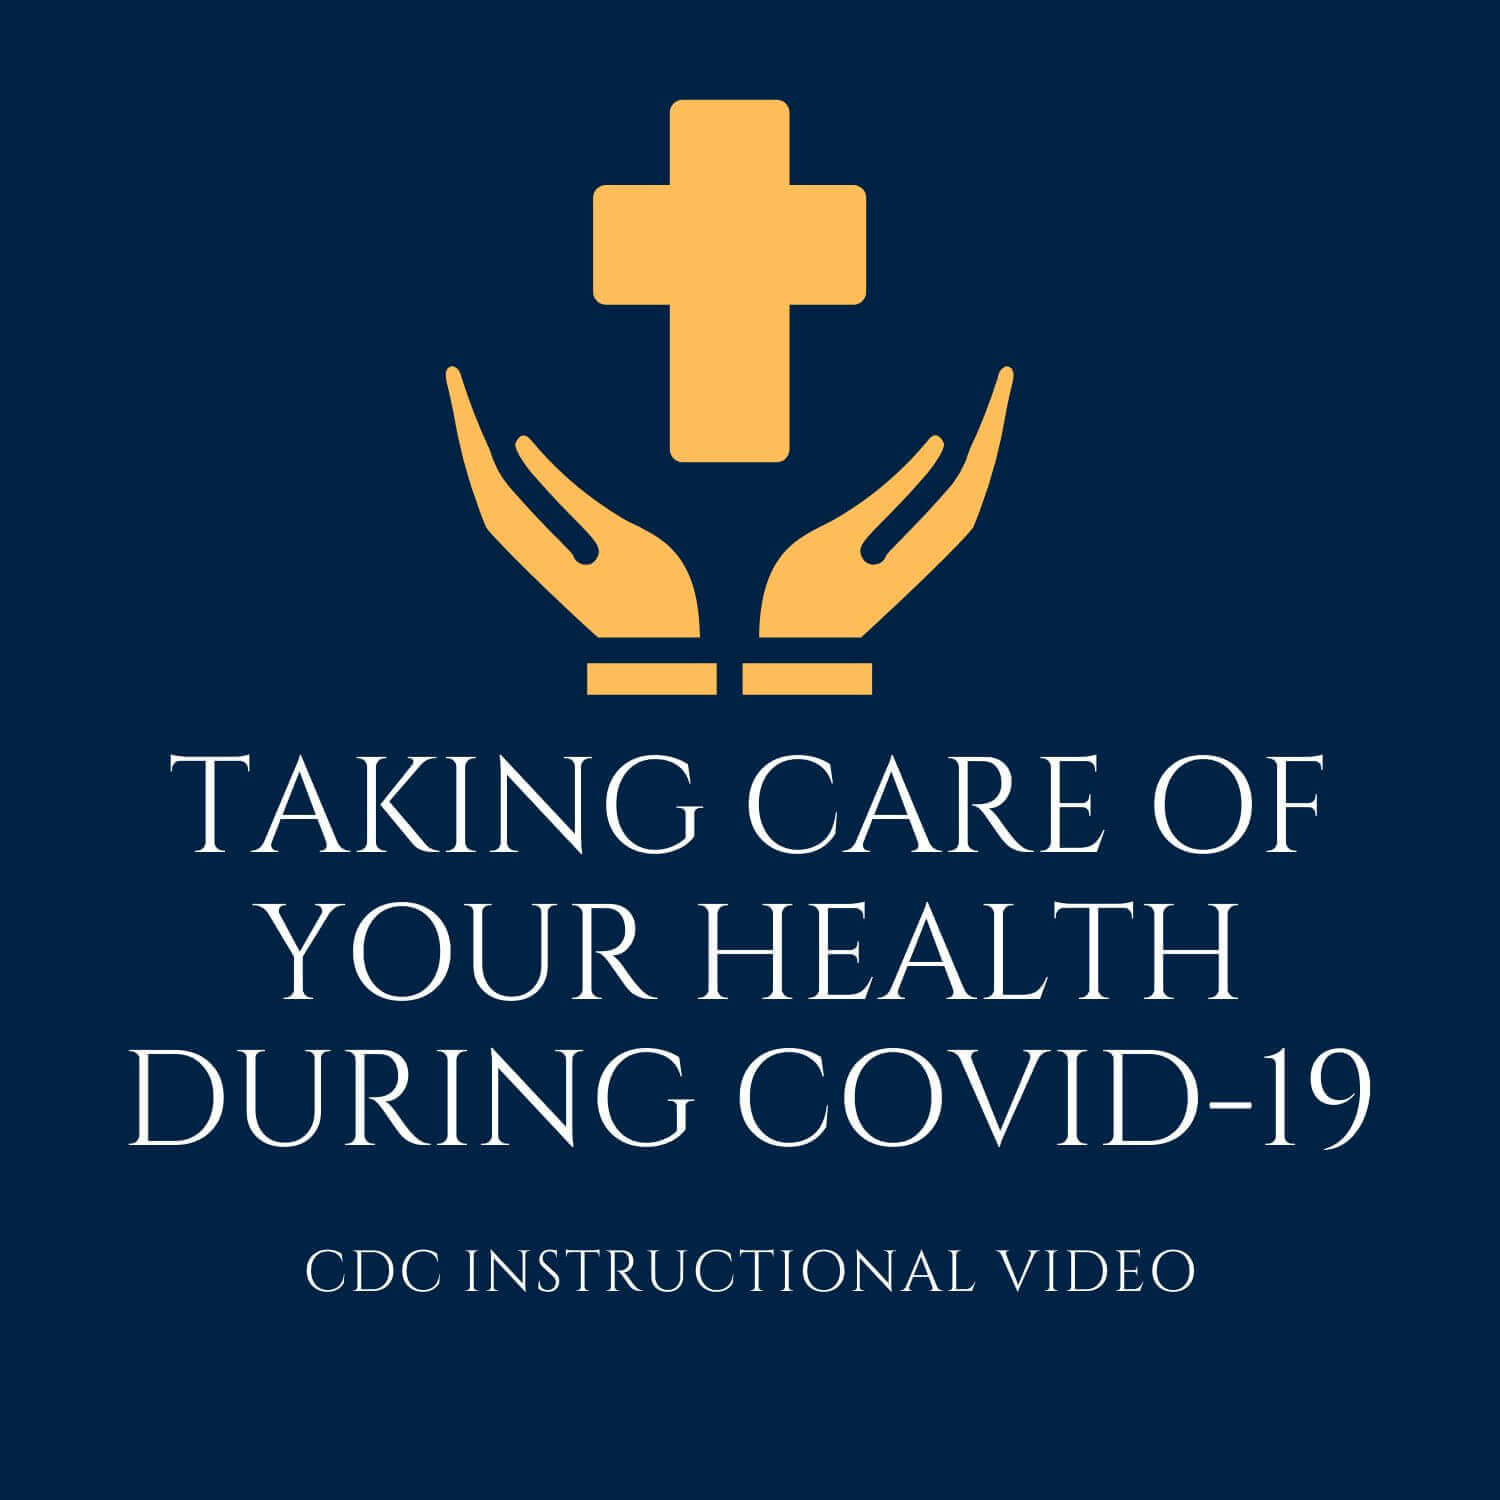 Taking Care of Your Health During COVID-19 Vector Image for Button Link to CDC Instructional Video